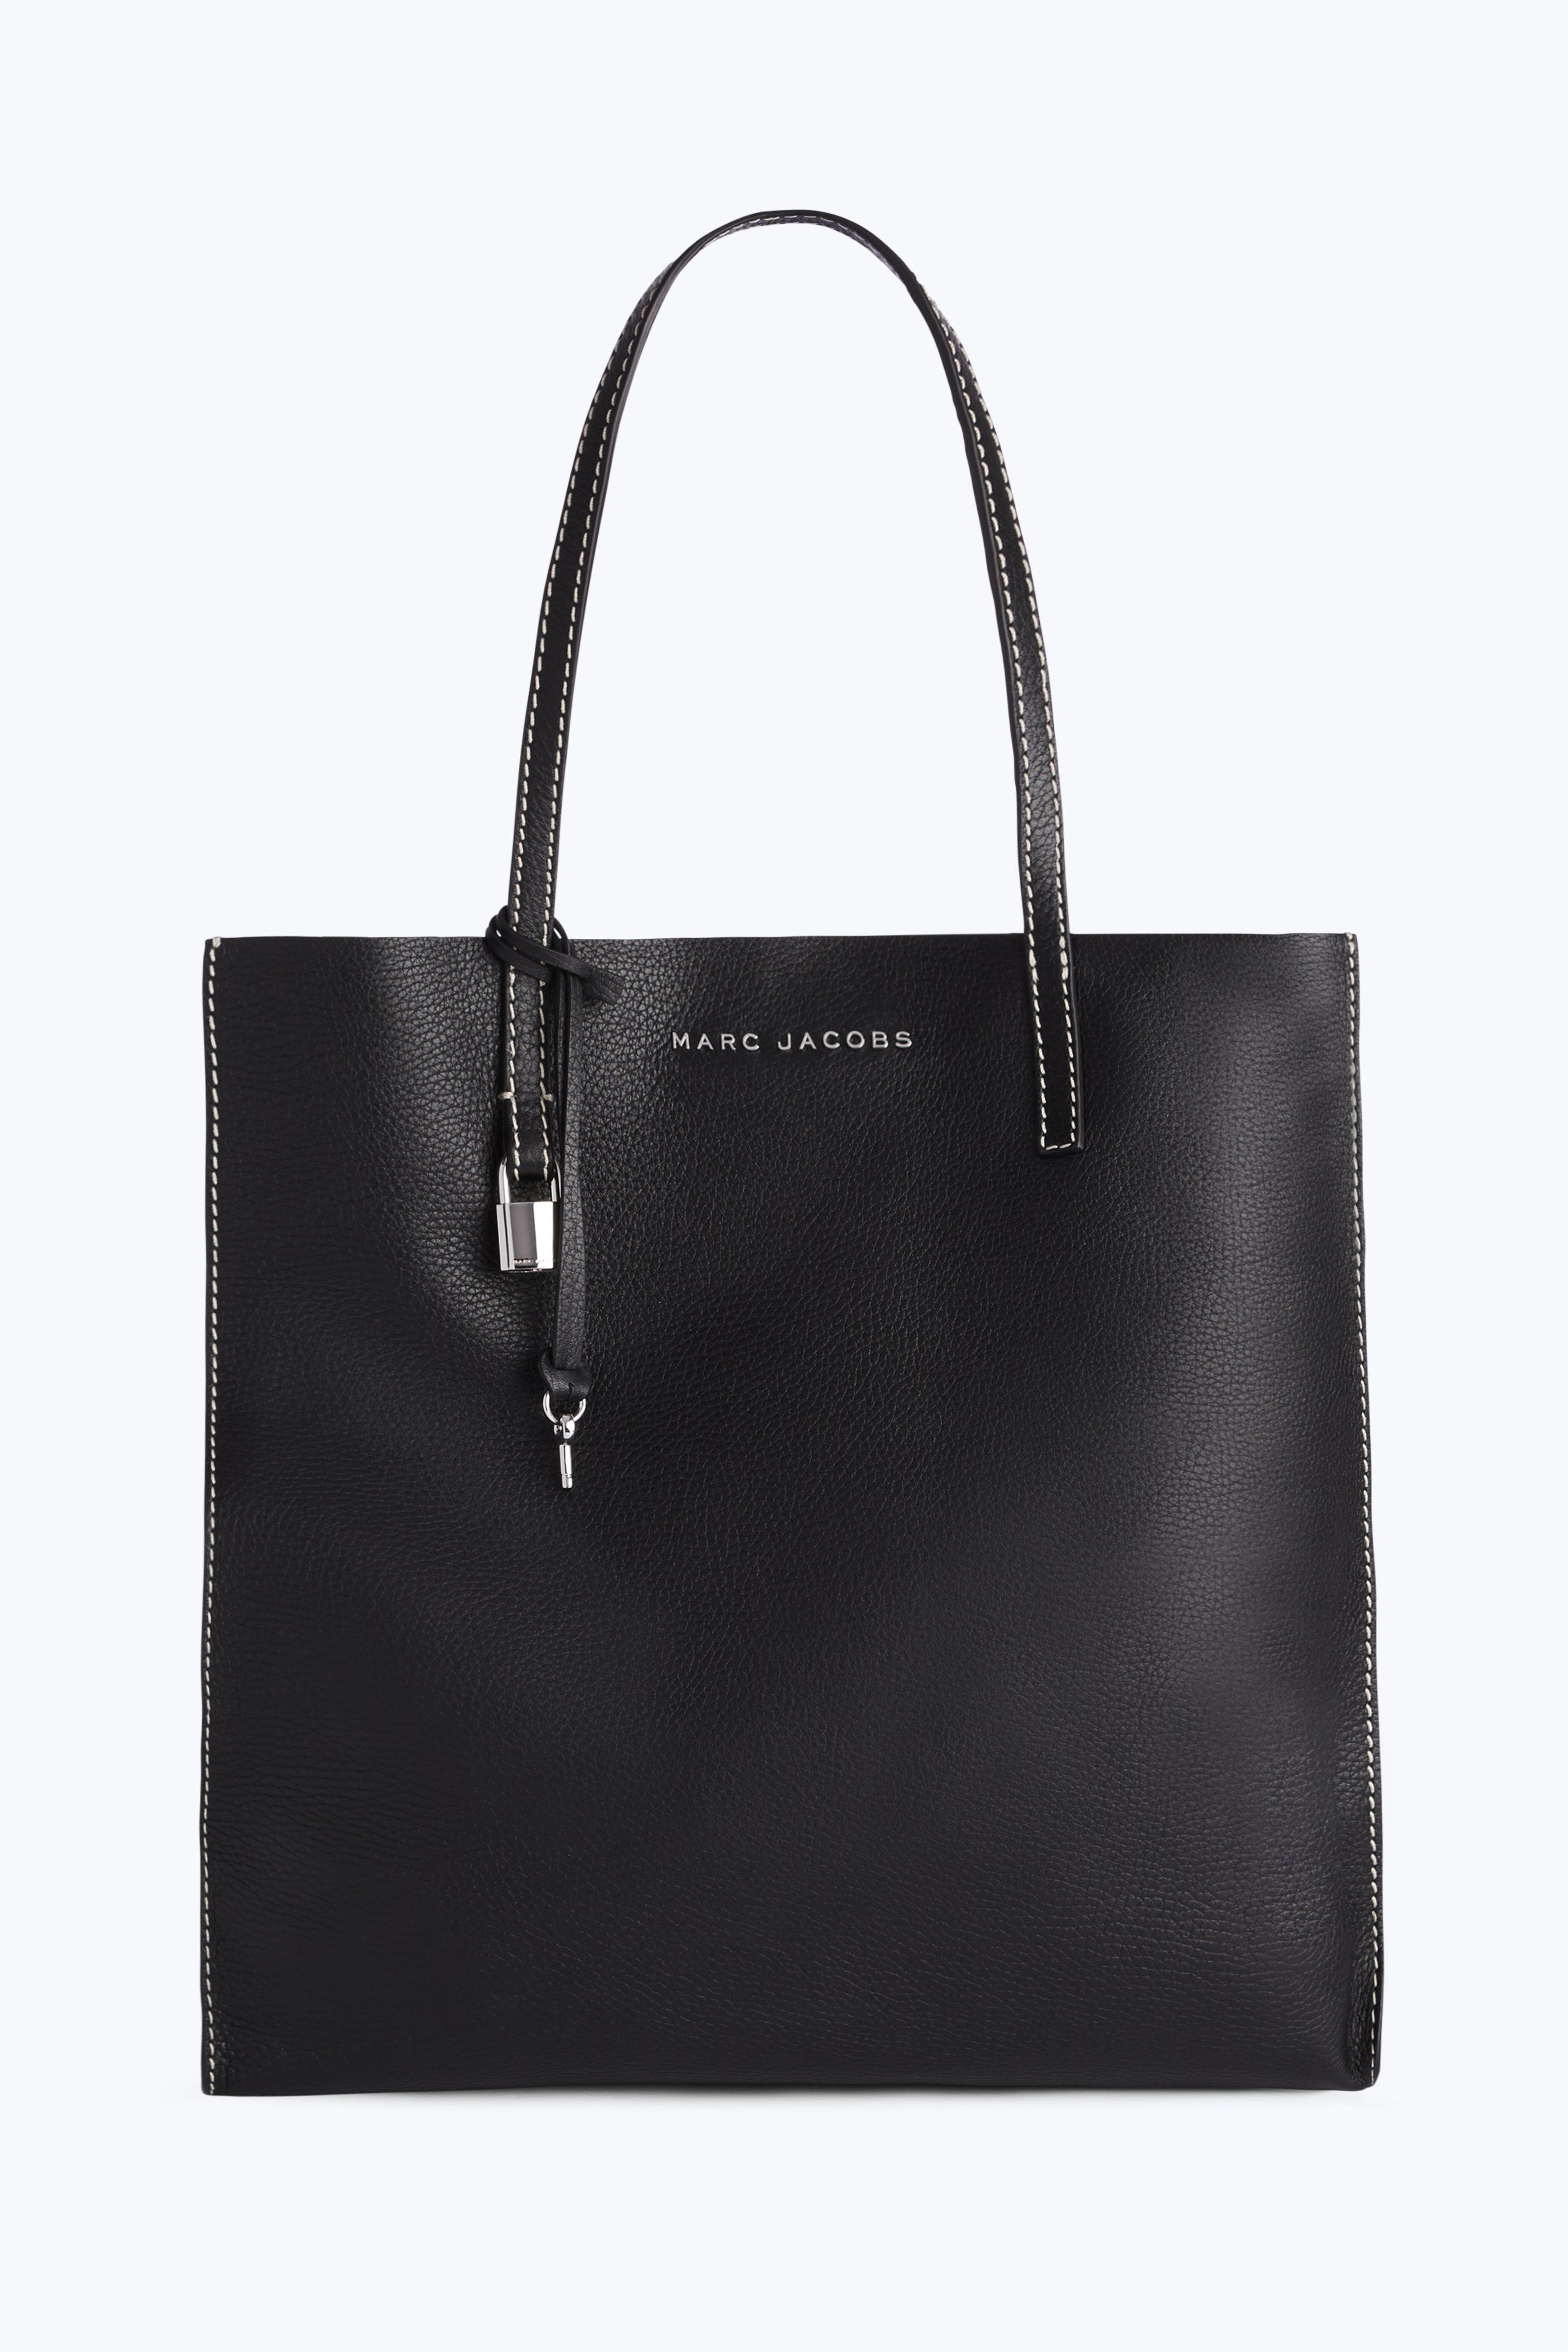 Lyst - Marc Jacobs The Grind Shopper Tote Bag in Black